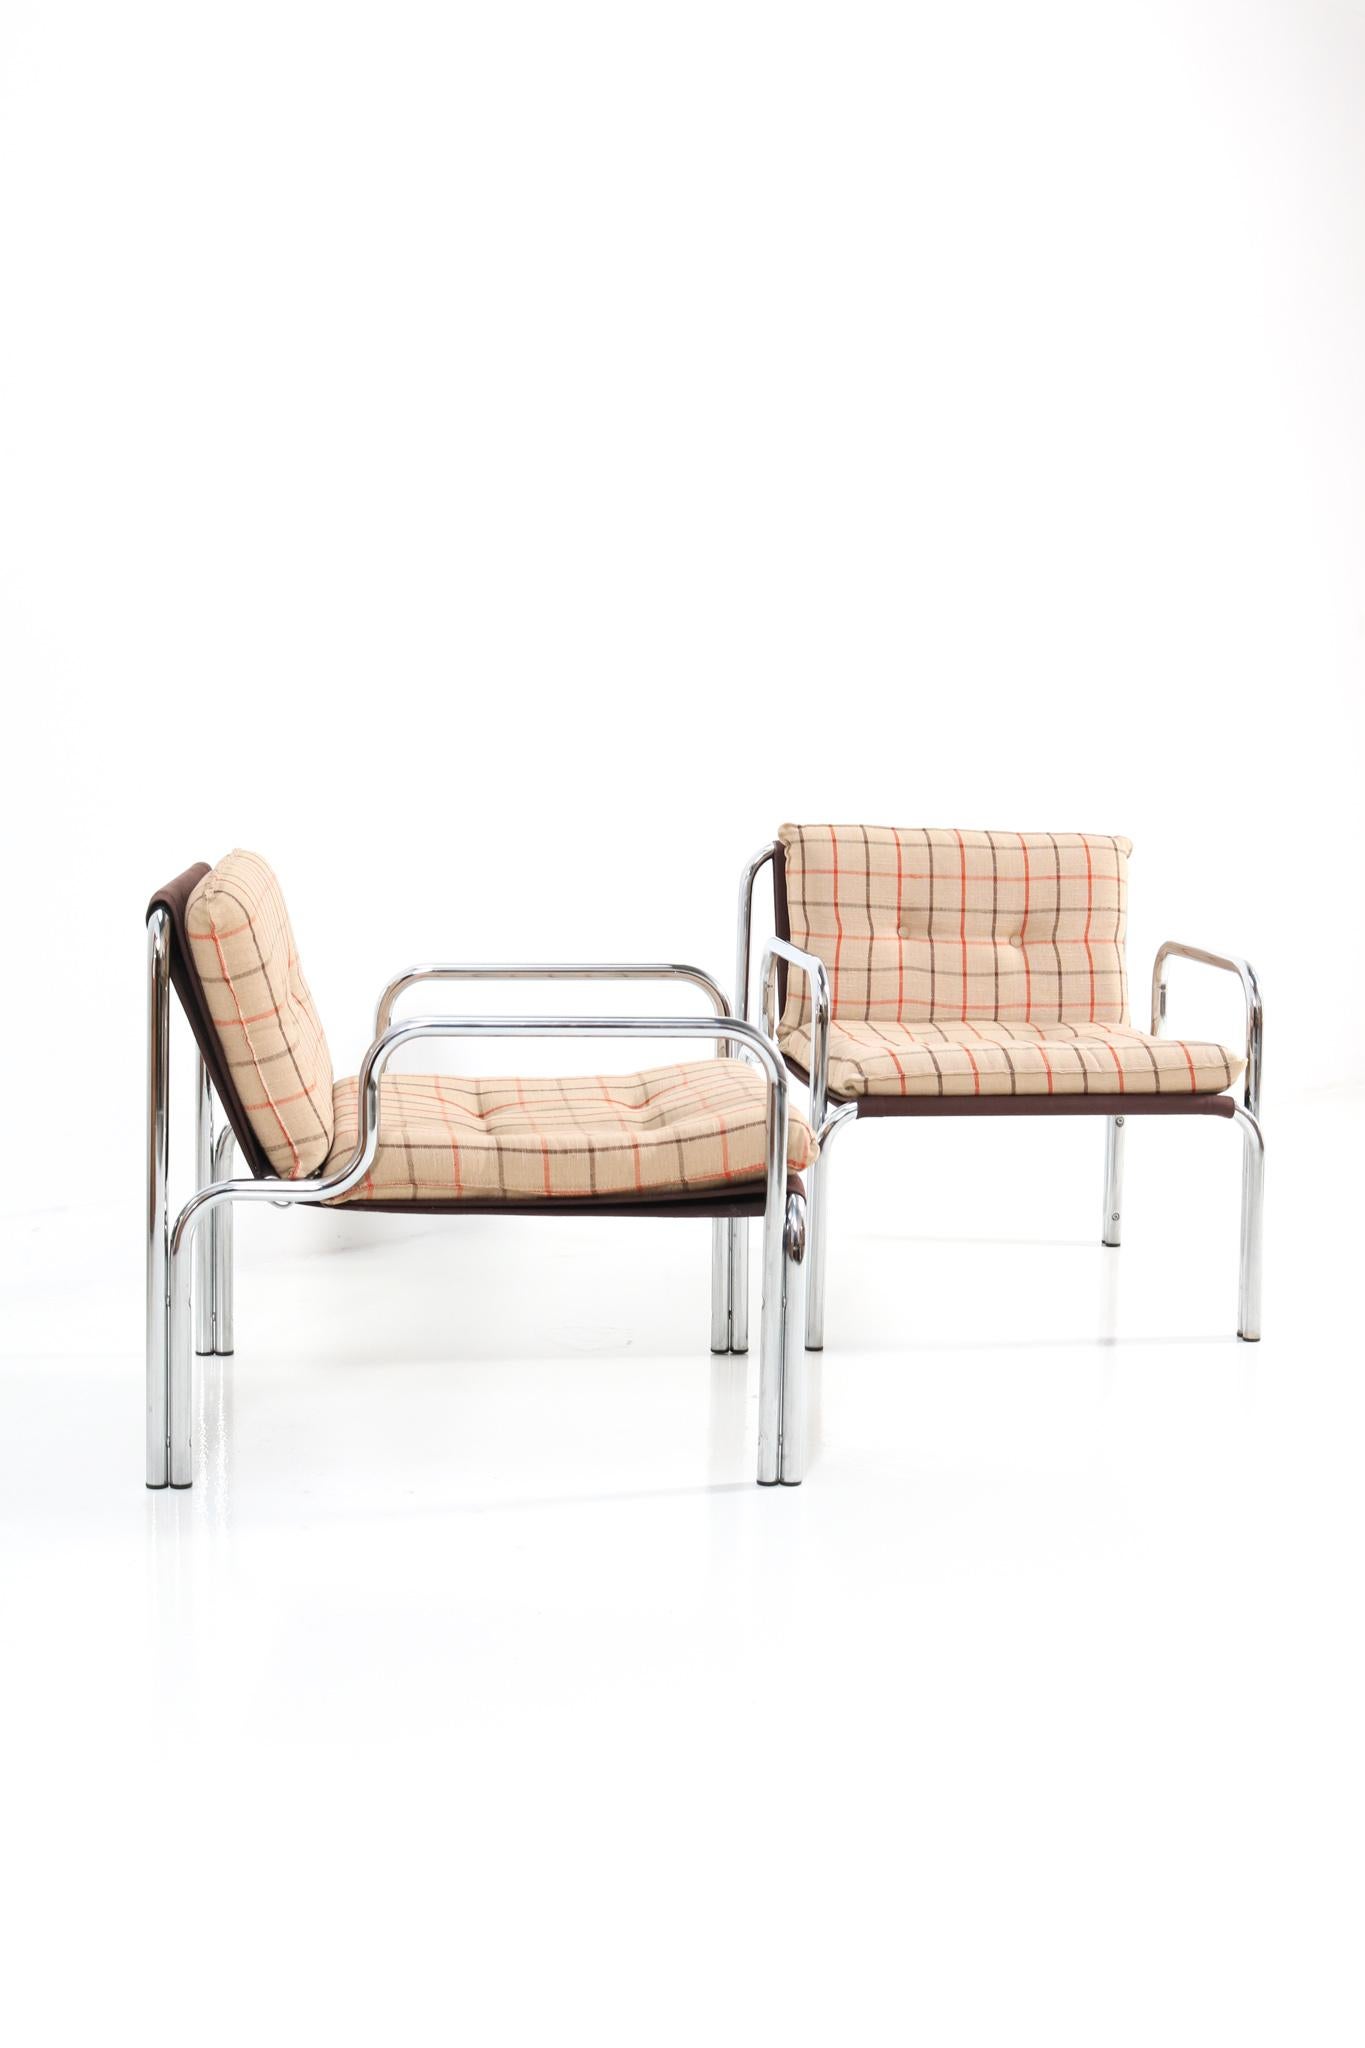 Pair of Mid-Century Modern Lounge Chairs by Wim Ypma for Riemersma, 1973 1